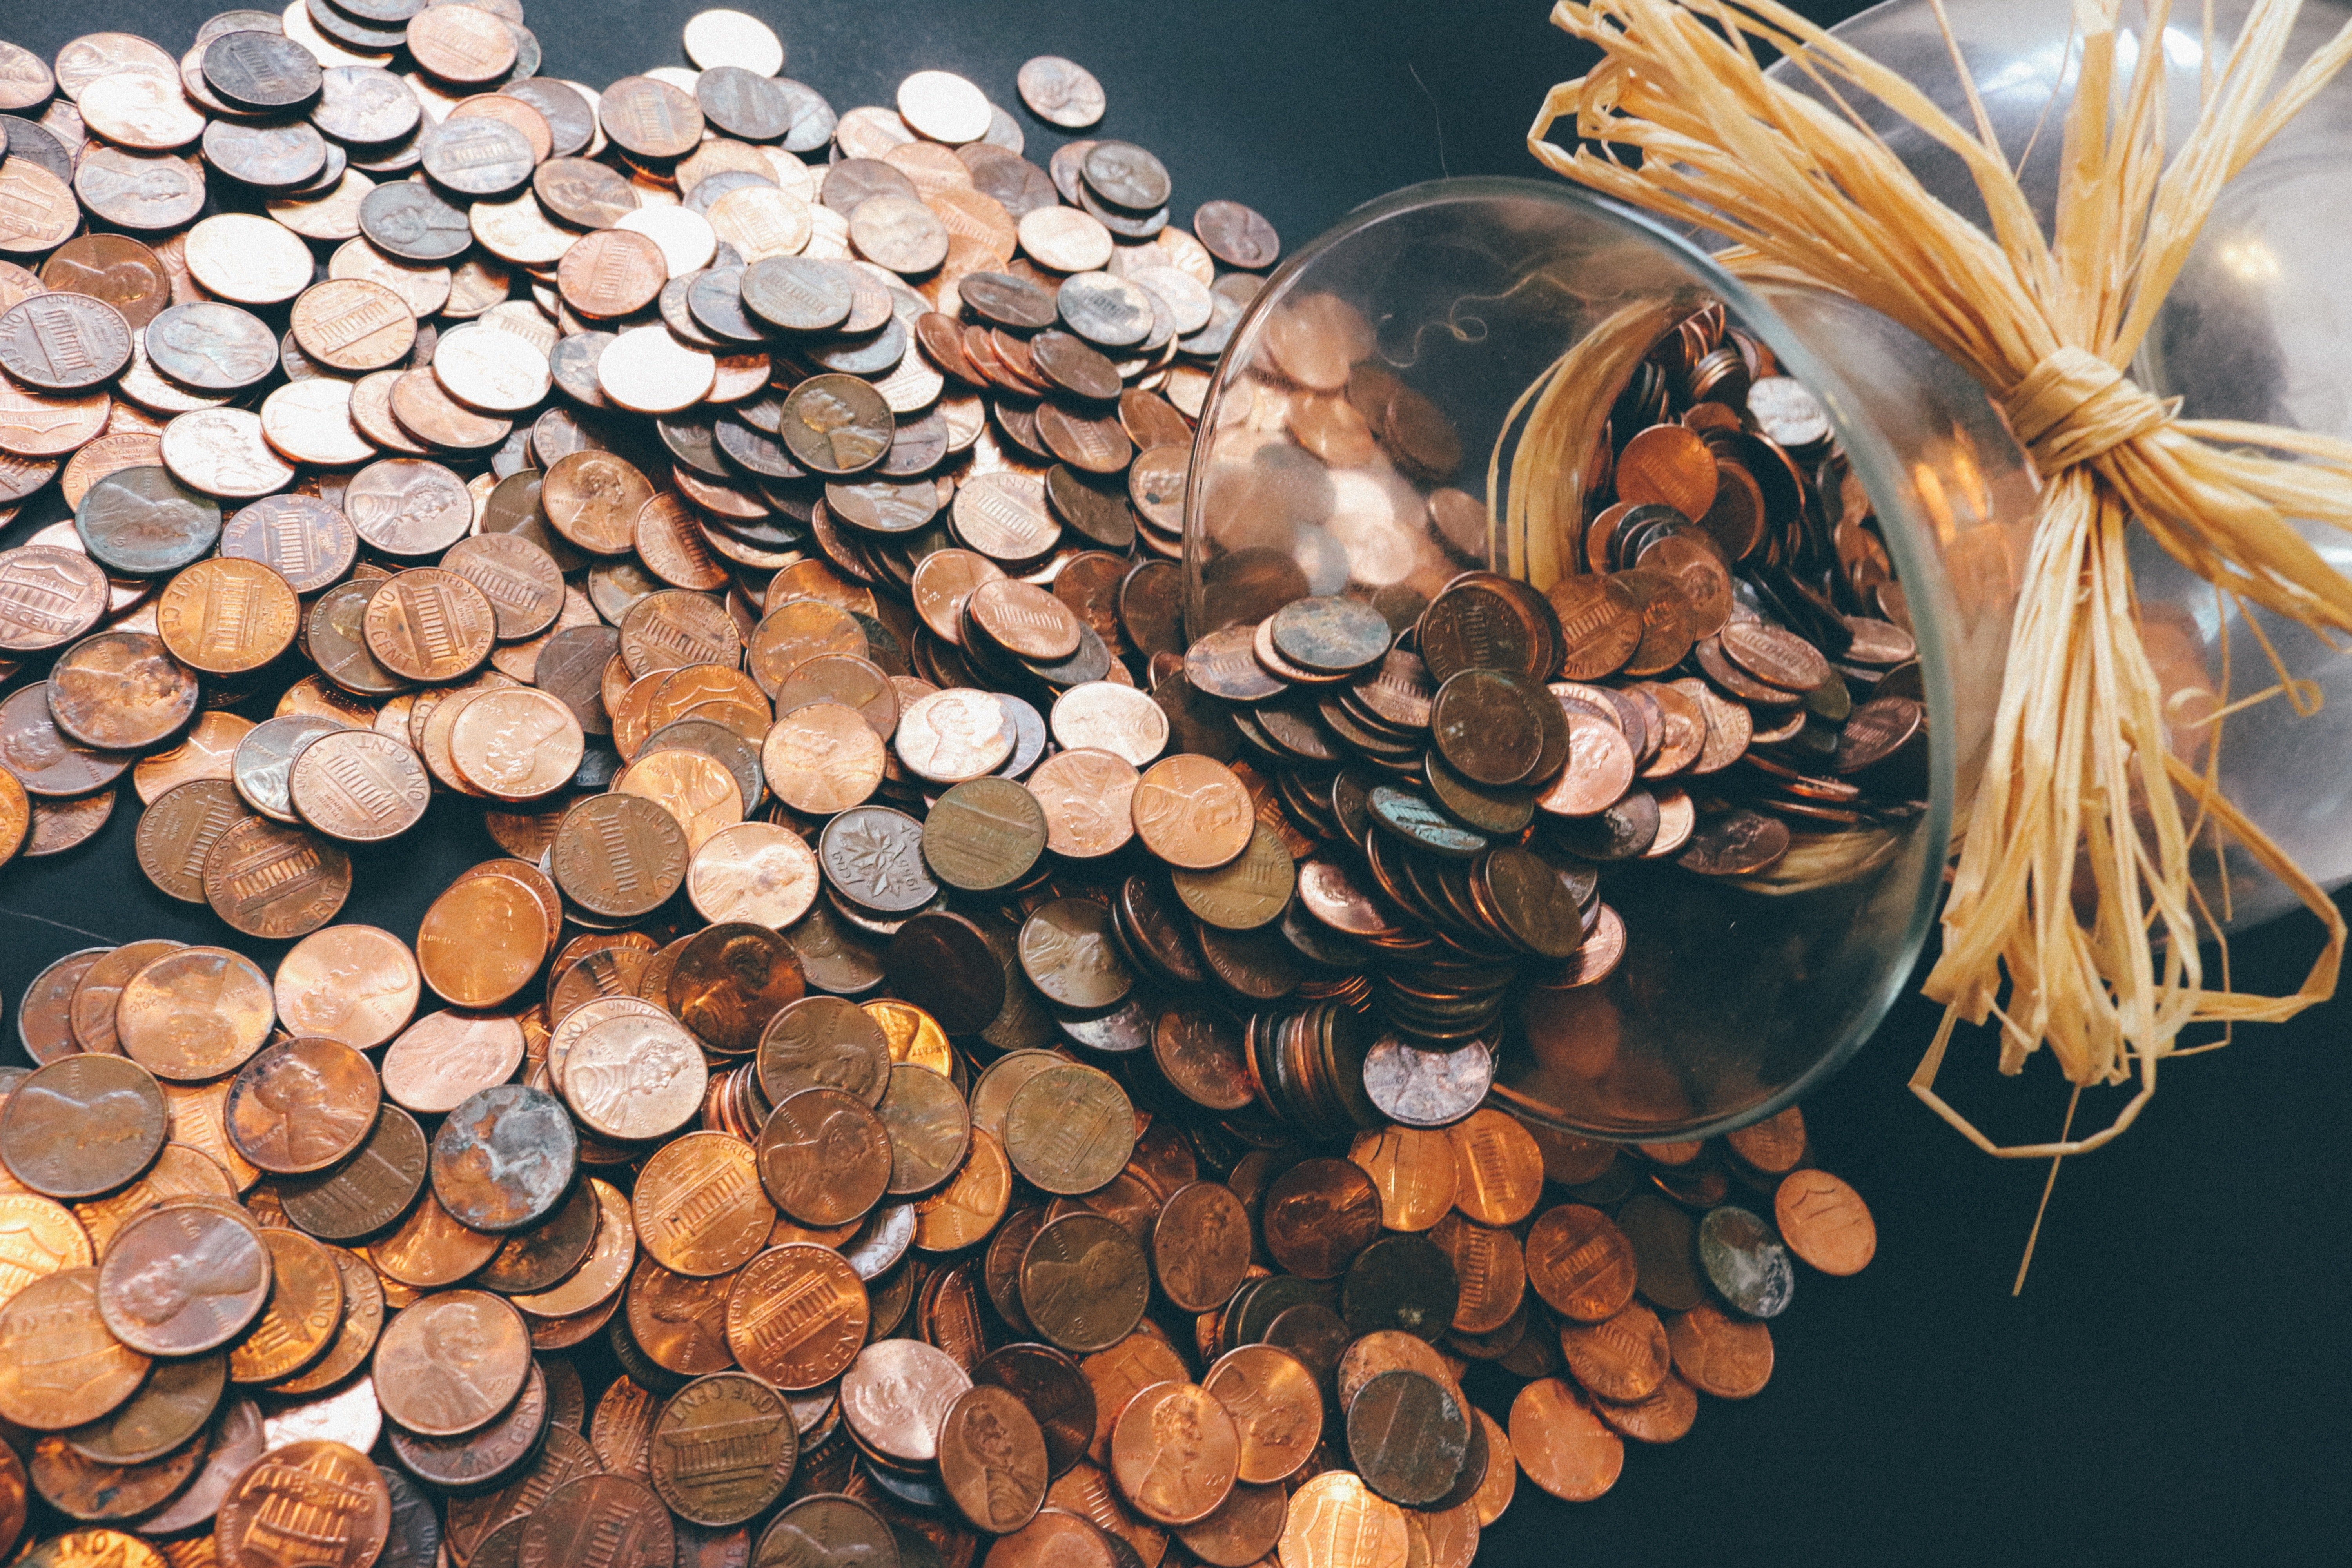 A jar of coins lies on a table | Photo: Pexels/Pixabay 